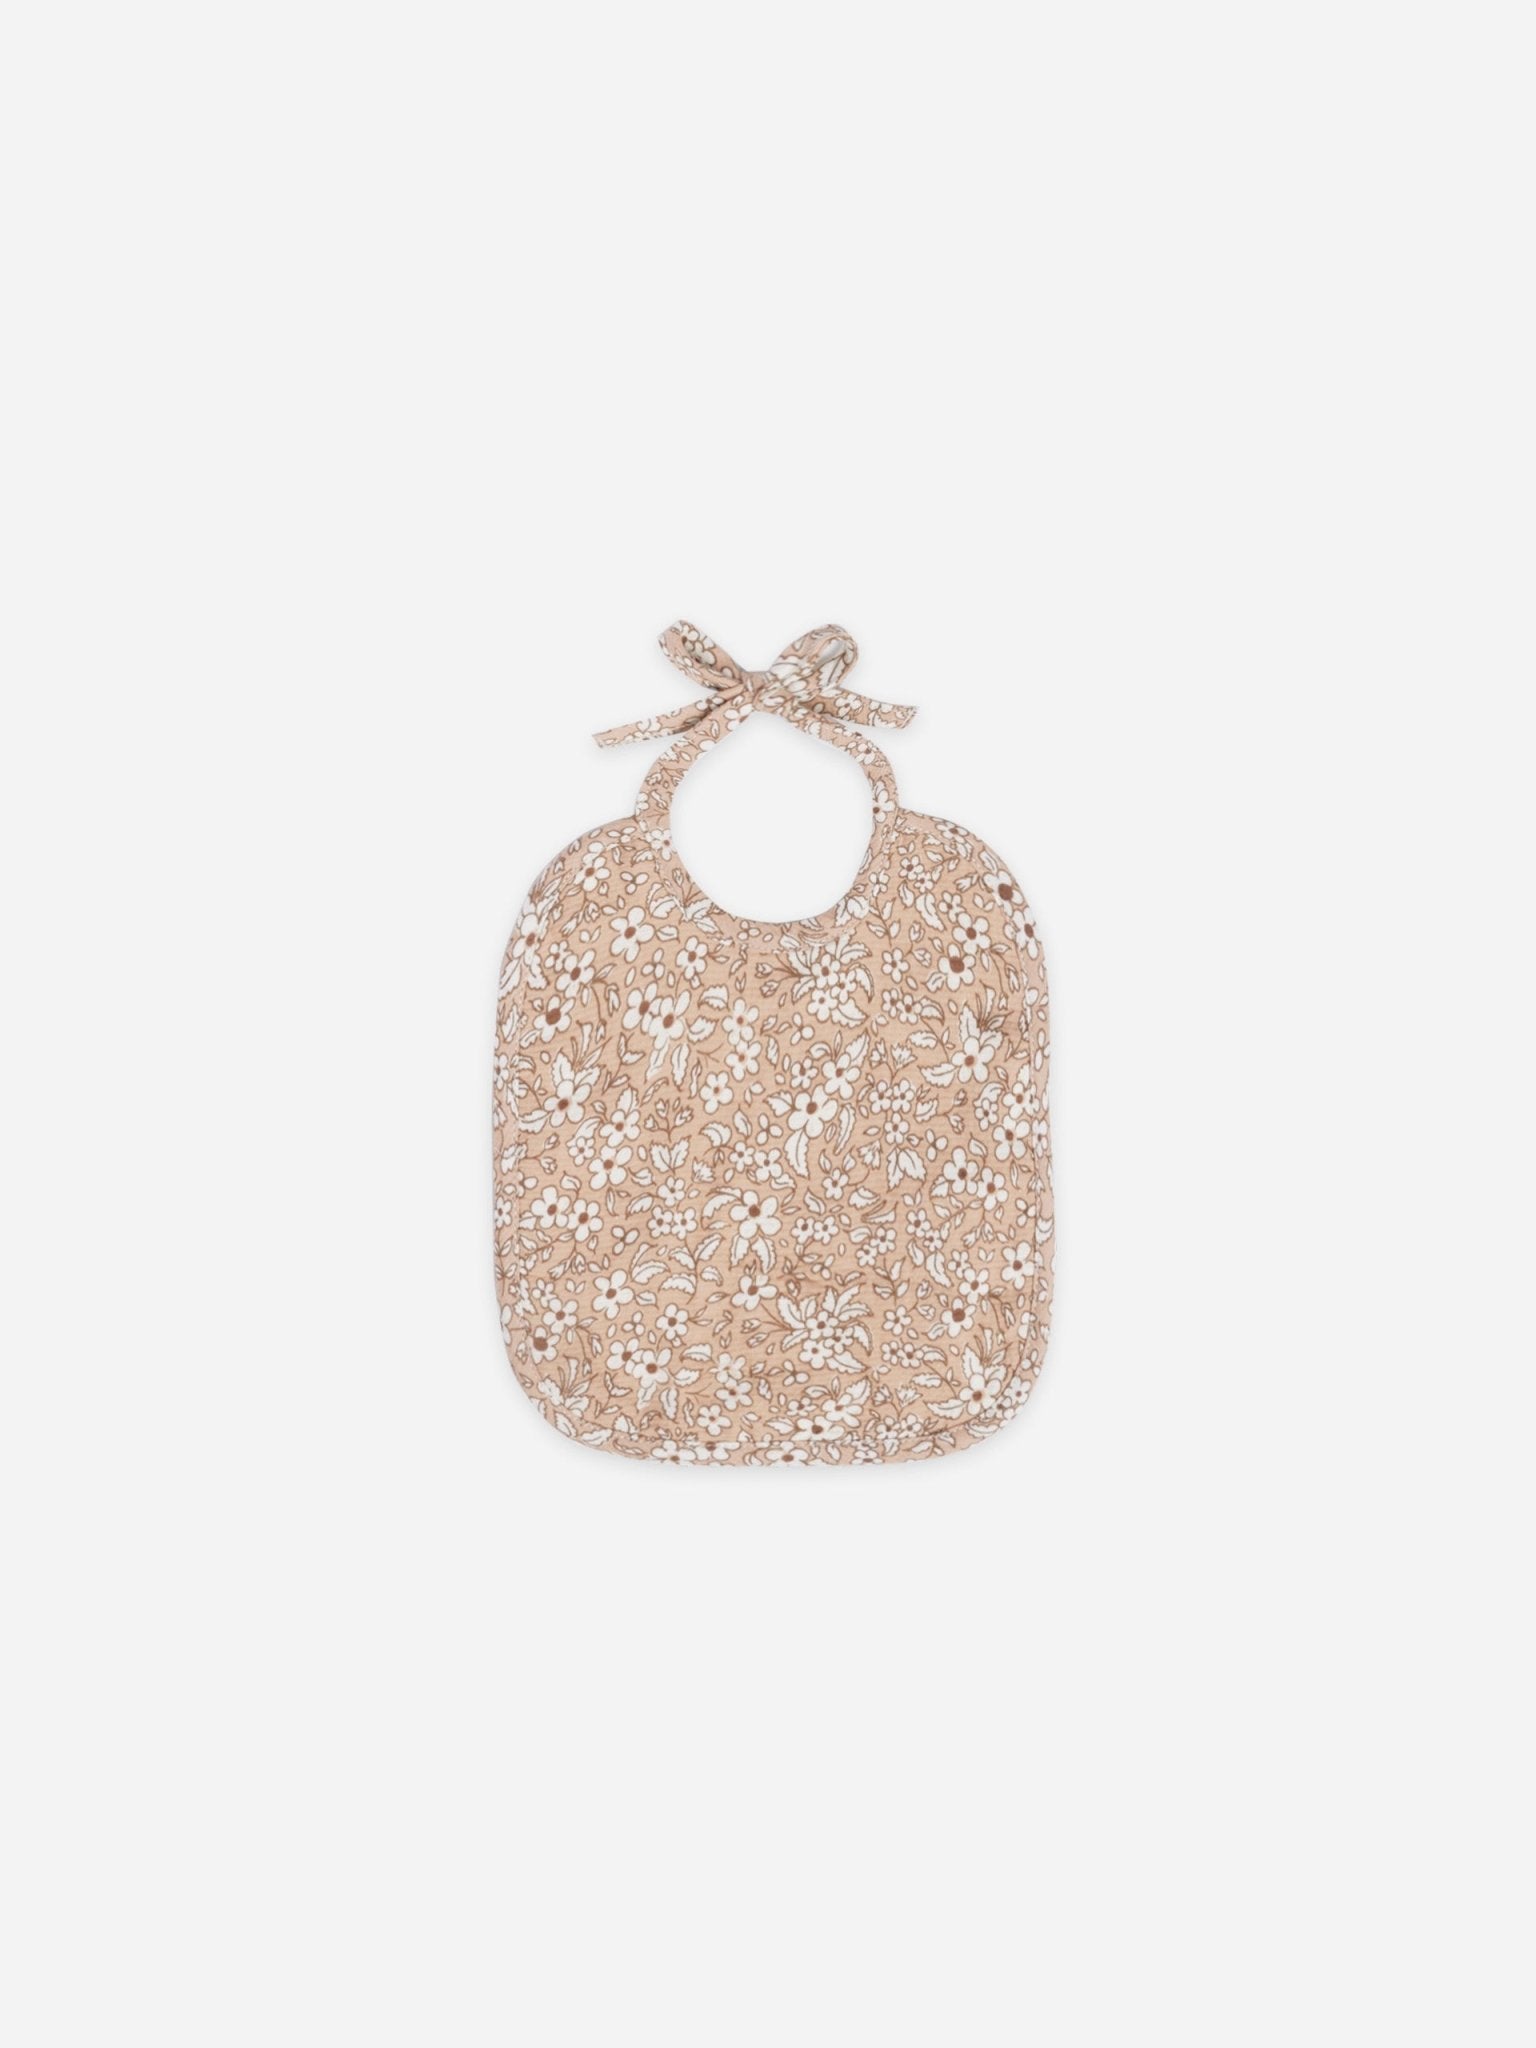 Woven Tie Bib | Apricot Floral – Quincy Mae